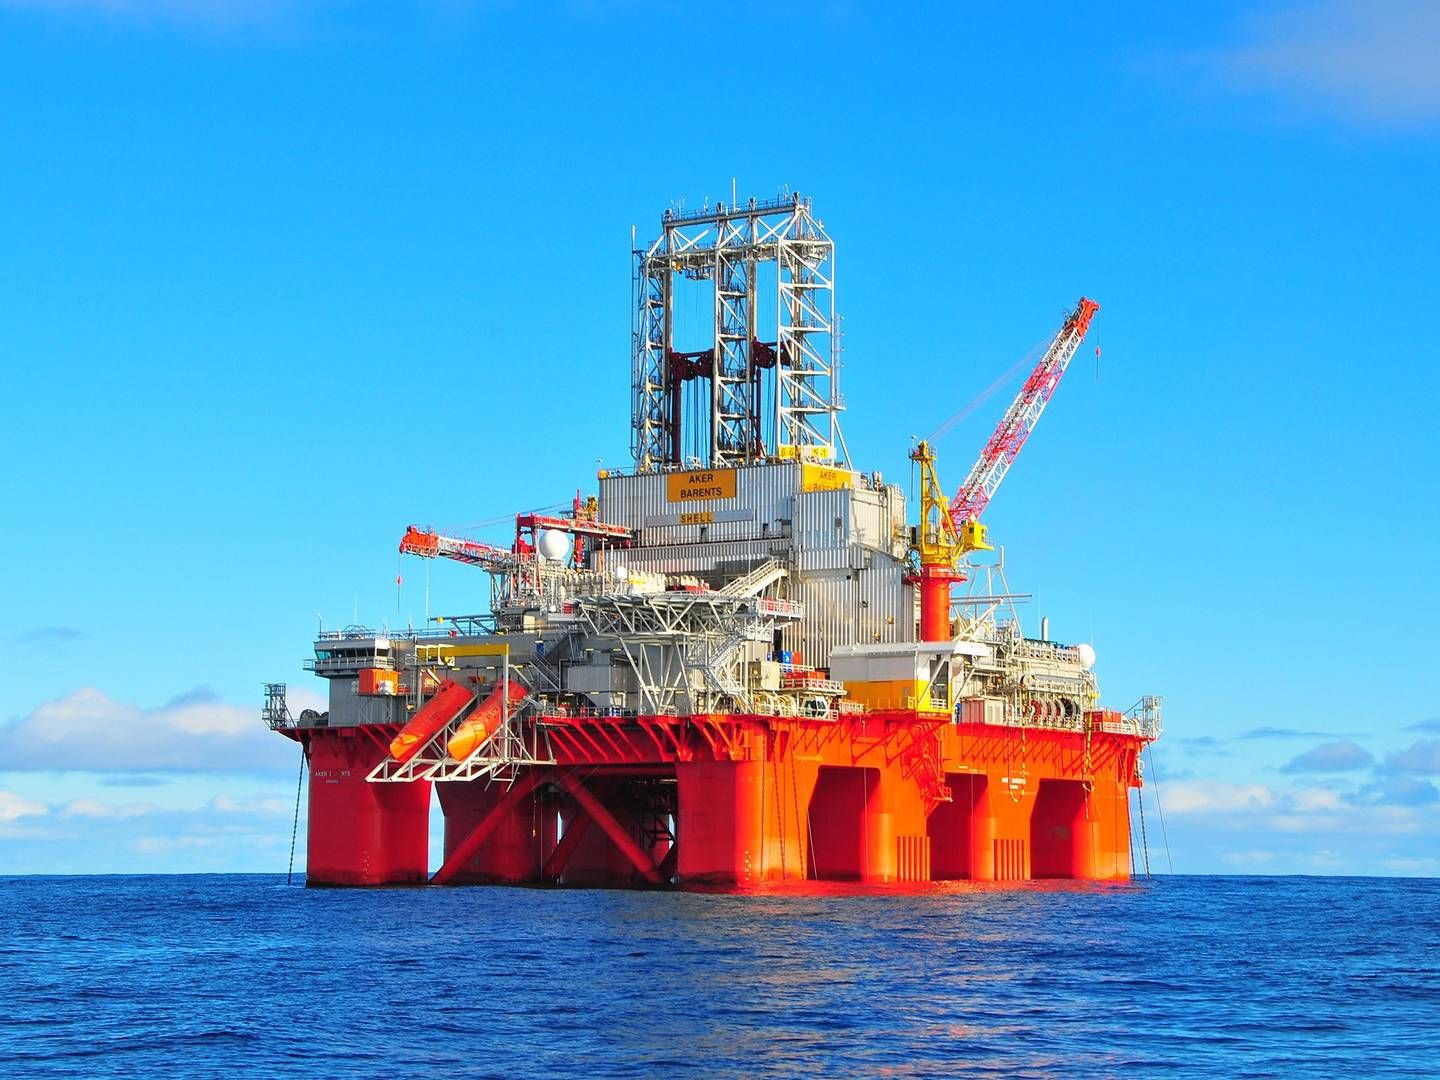 Transocean is one of the world's largest drilling companies and is based in Switzerland. | Photo: Pr/transocean